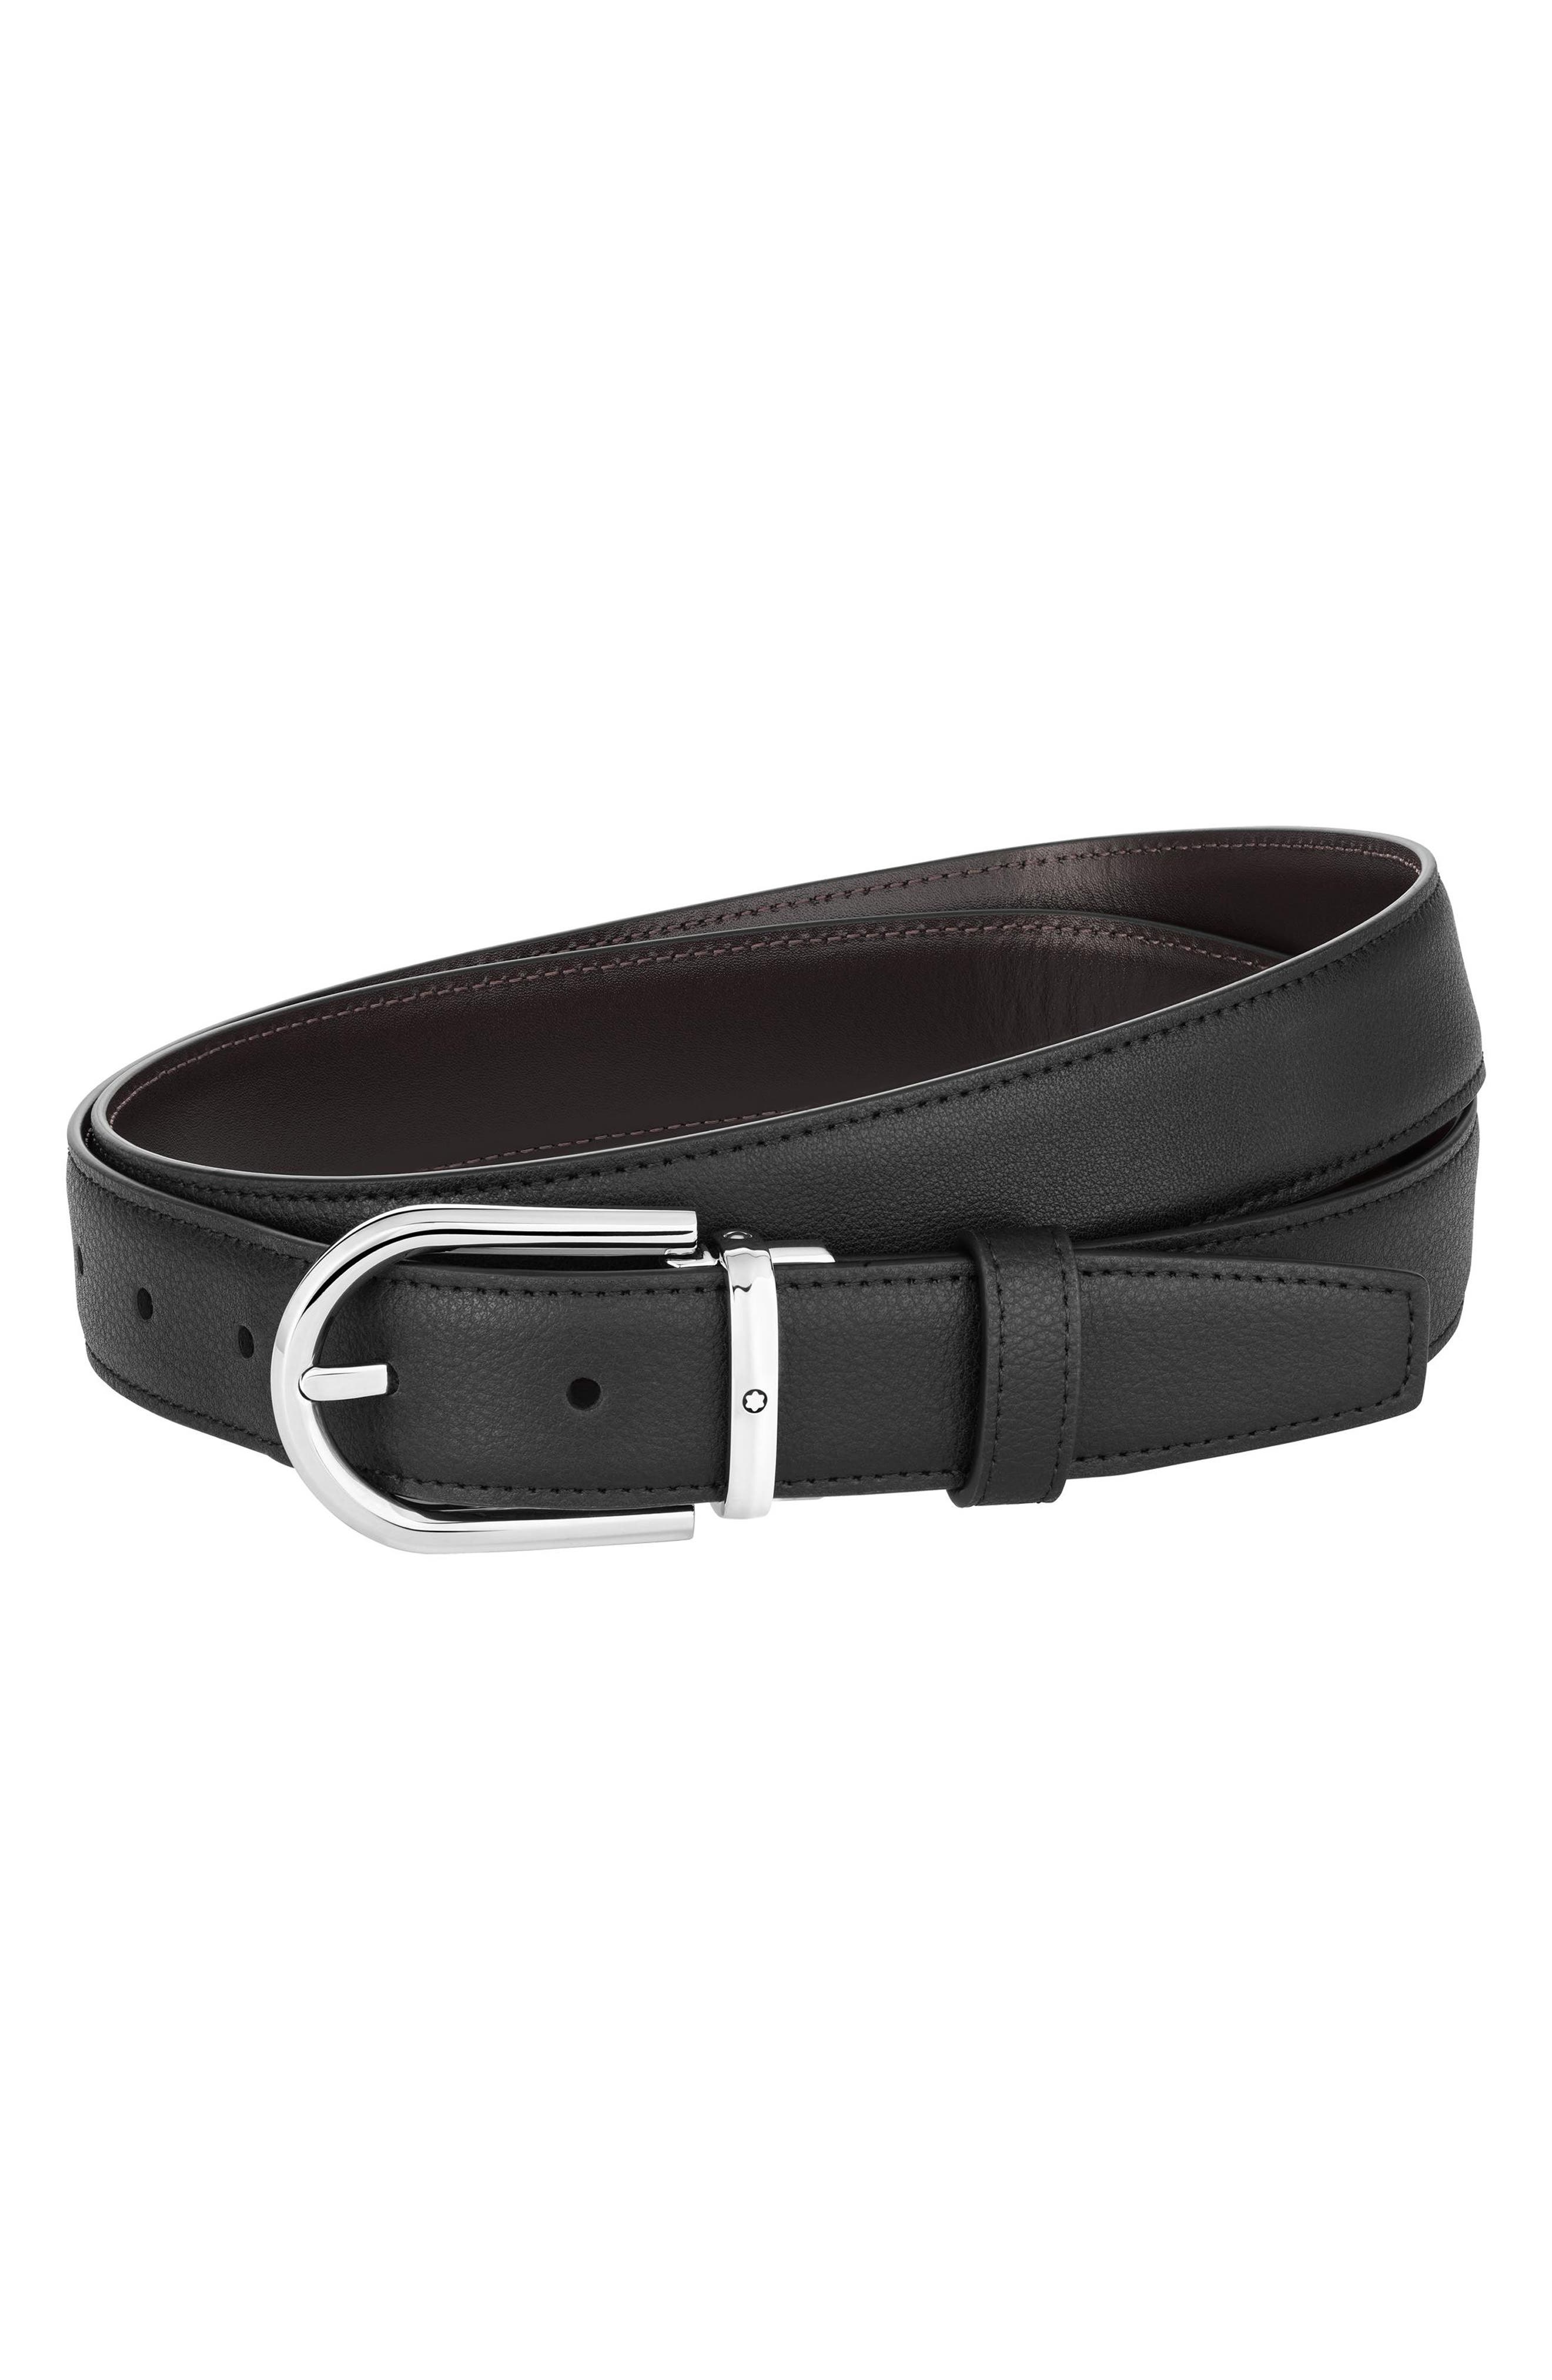 Men's Dress Belt 'ALL GENUINE LEATHER' Stitching 30mm Regular Big and Tall Sizes 